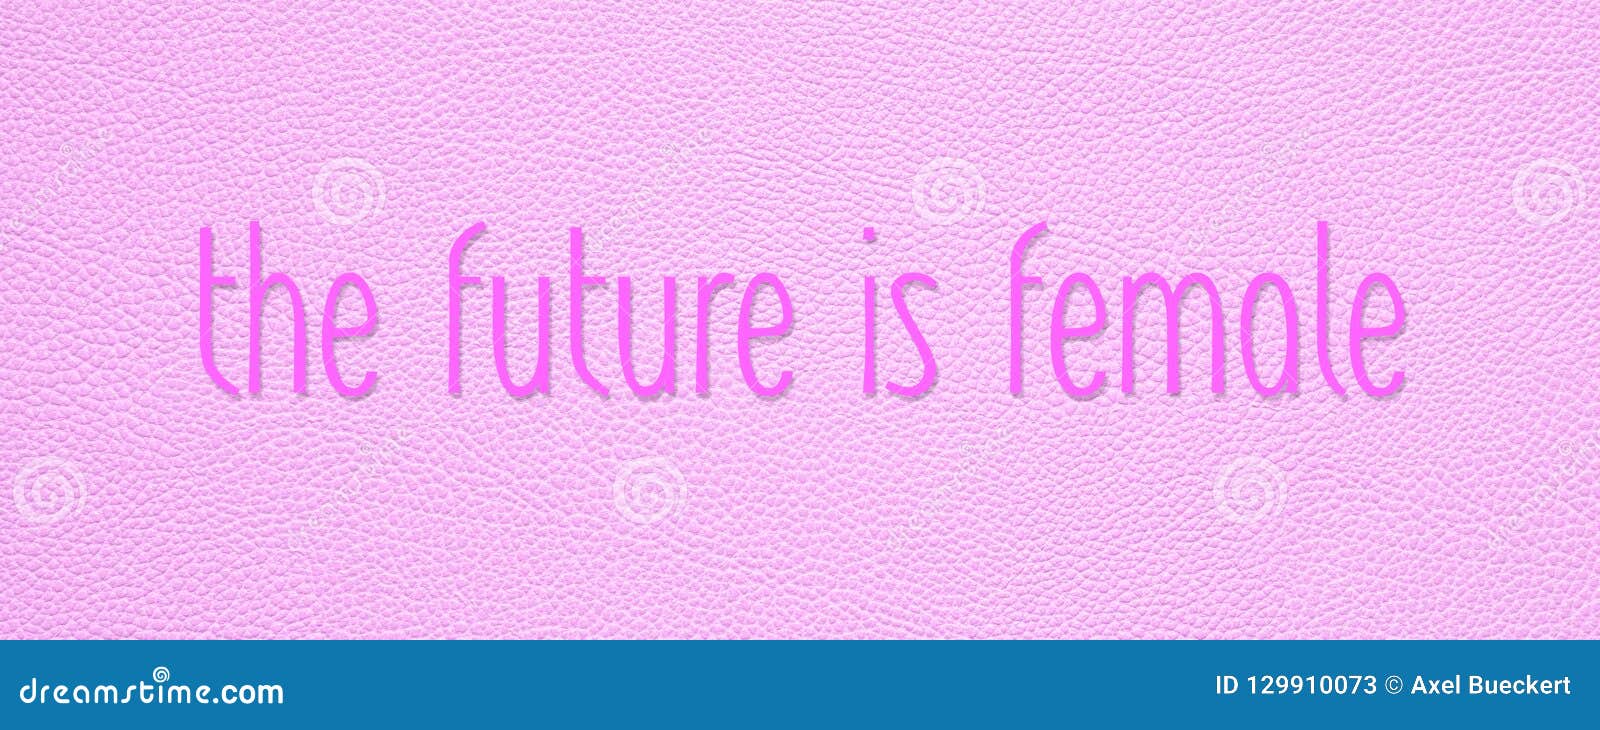 the future is female pink empowerment banner